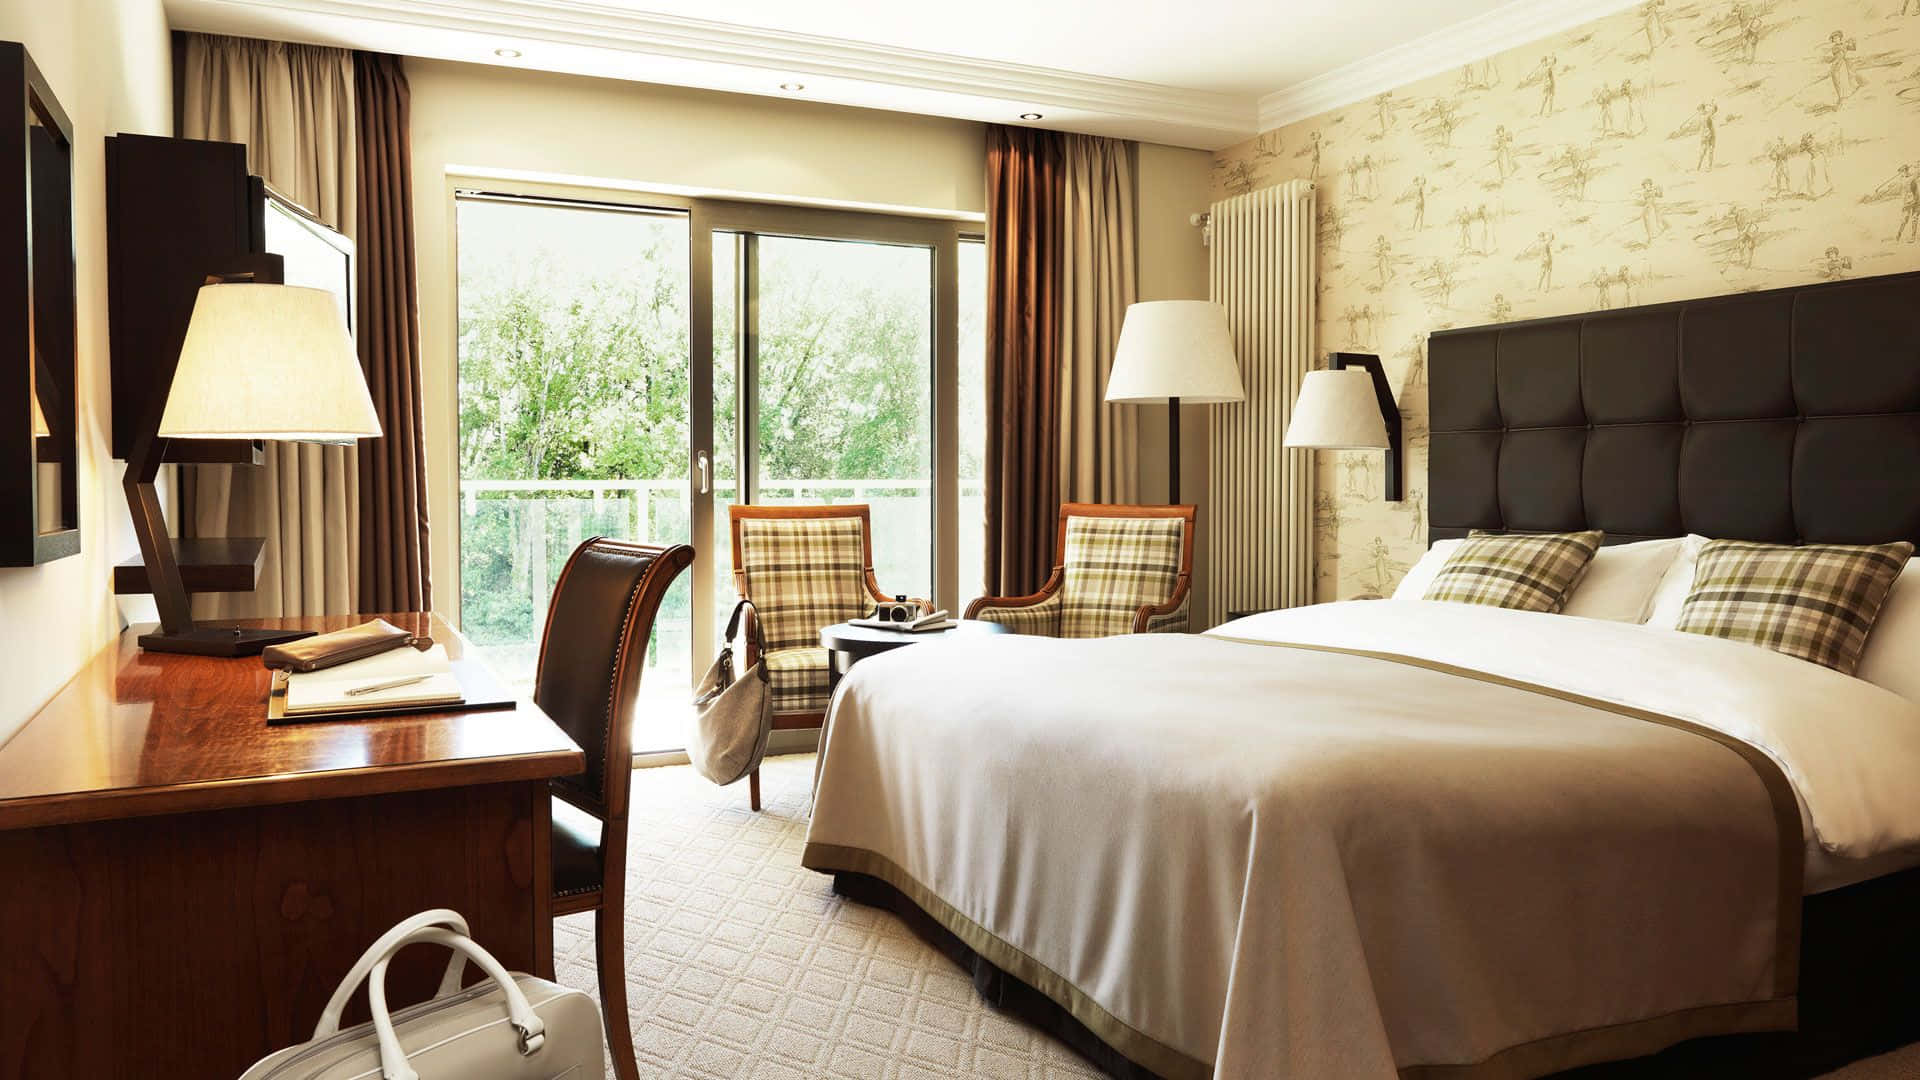 Elegant Hotel Room Interior with King-sized Bed and Modern Amenities